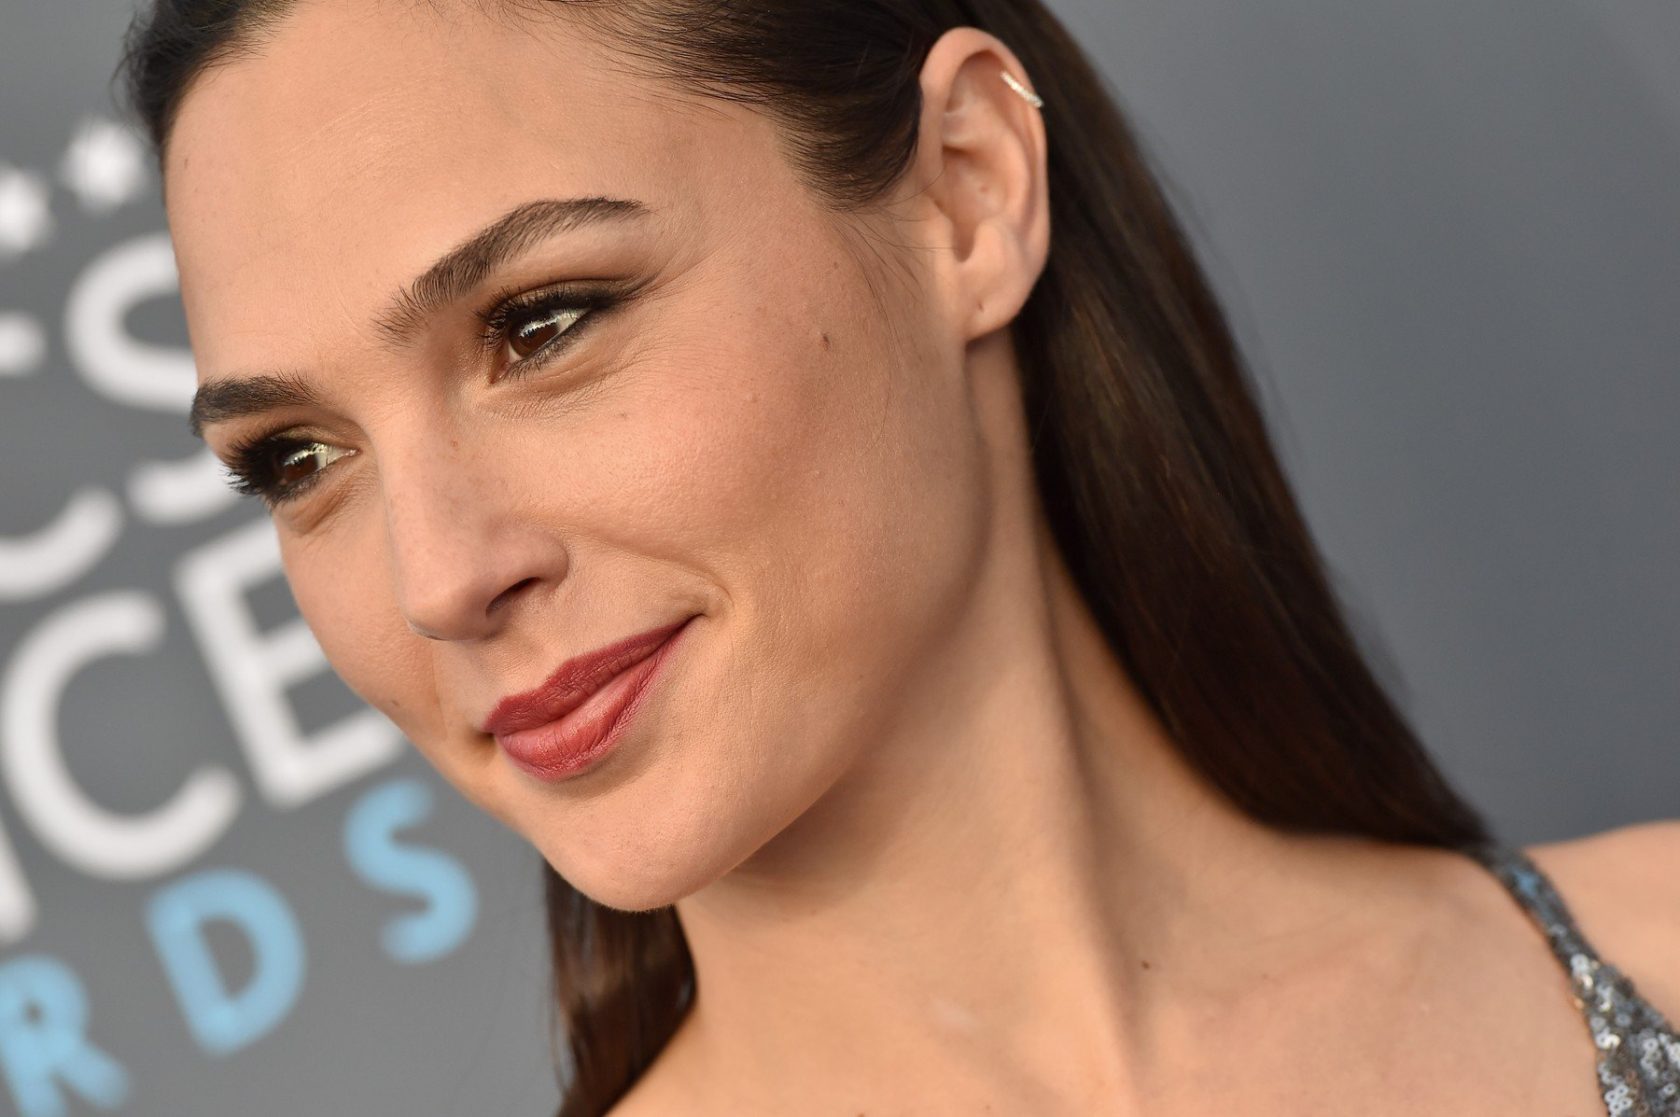 23rd Annual Critics' Choice Awards. Barker Hangar, Santa Monica, CA. Pictured: Gal Gadot. EVENT January 11, 2018 Job: 180111A1, Image: 359939639, License: Rights-managed, Restrictions: 000, Model Release: no, Credit line: Profimedia, Bauer Griffin